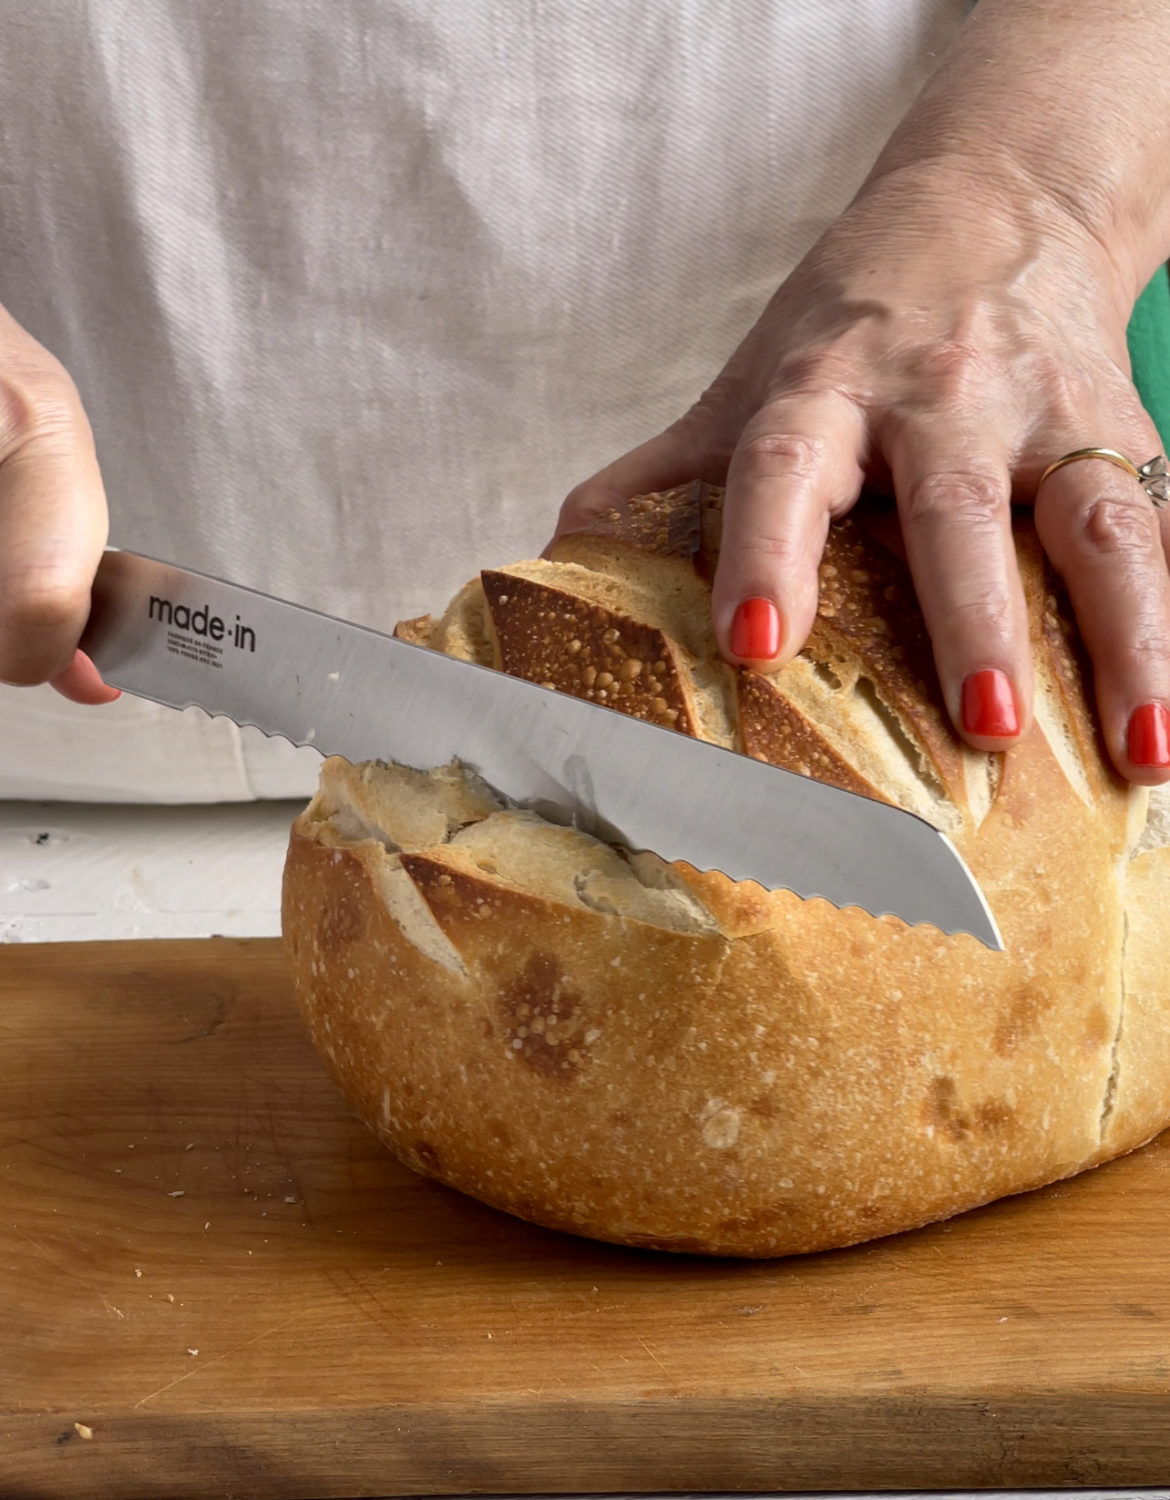 made in bread knife